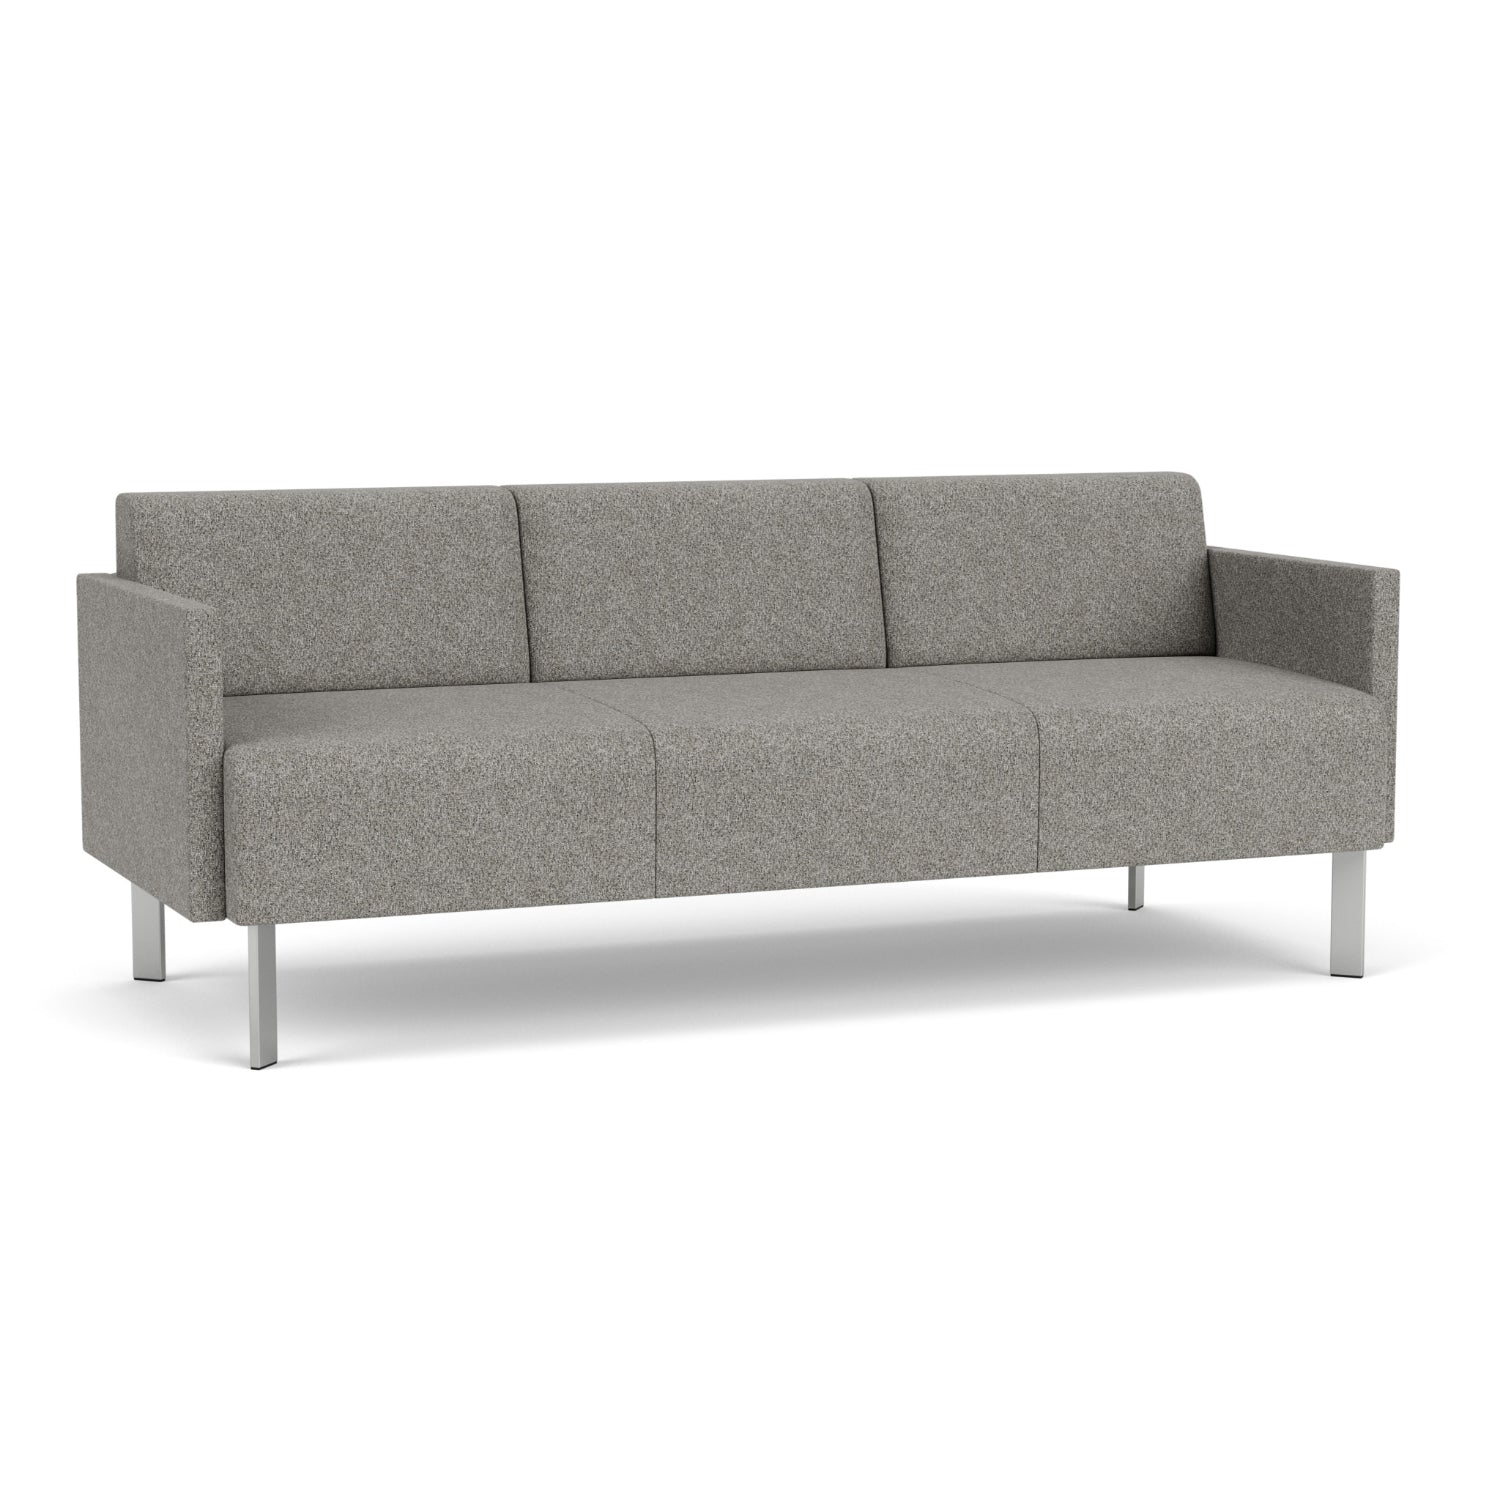 Luxe Collection Reception Seating, Sofa, Standard Fabric Upholstery, FREE SHIPPING